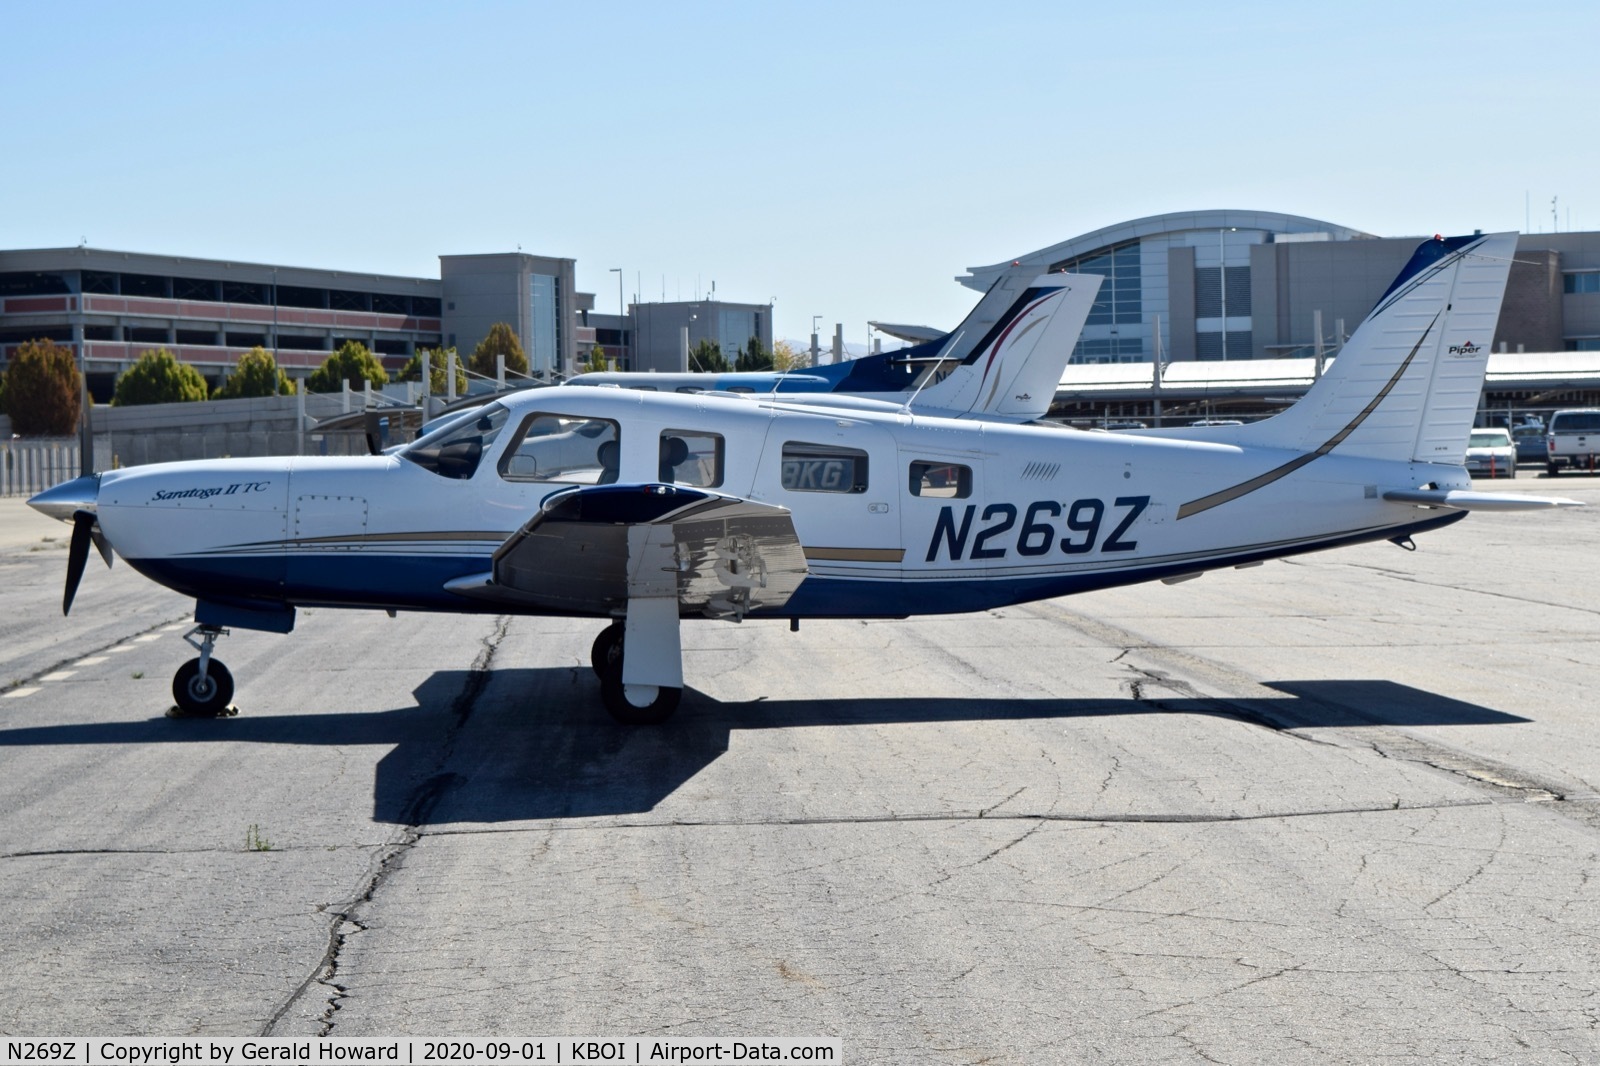 N269Z, 2006 Piper PA-32R-301T Turbo Saratoga C/N 3257407, Parked on north GA ramp.